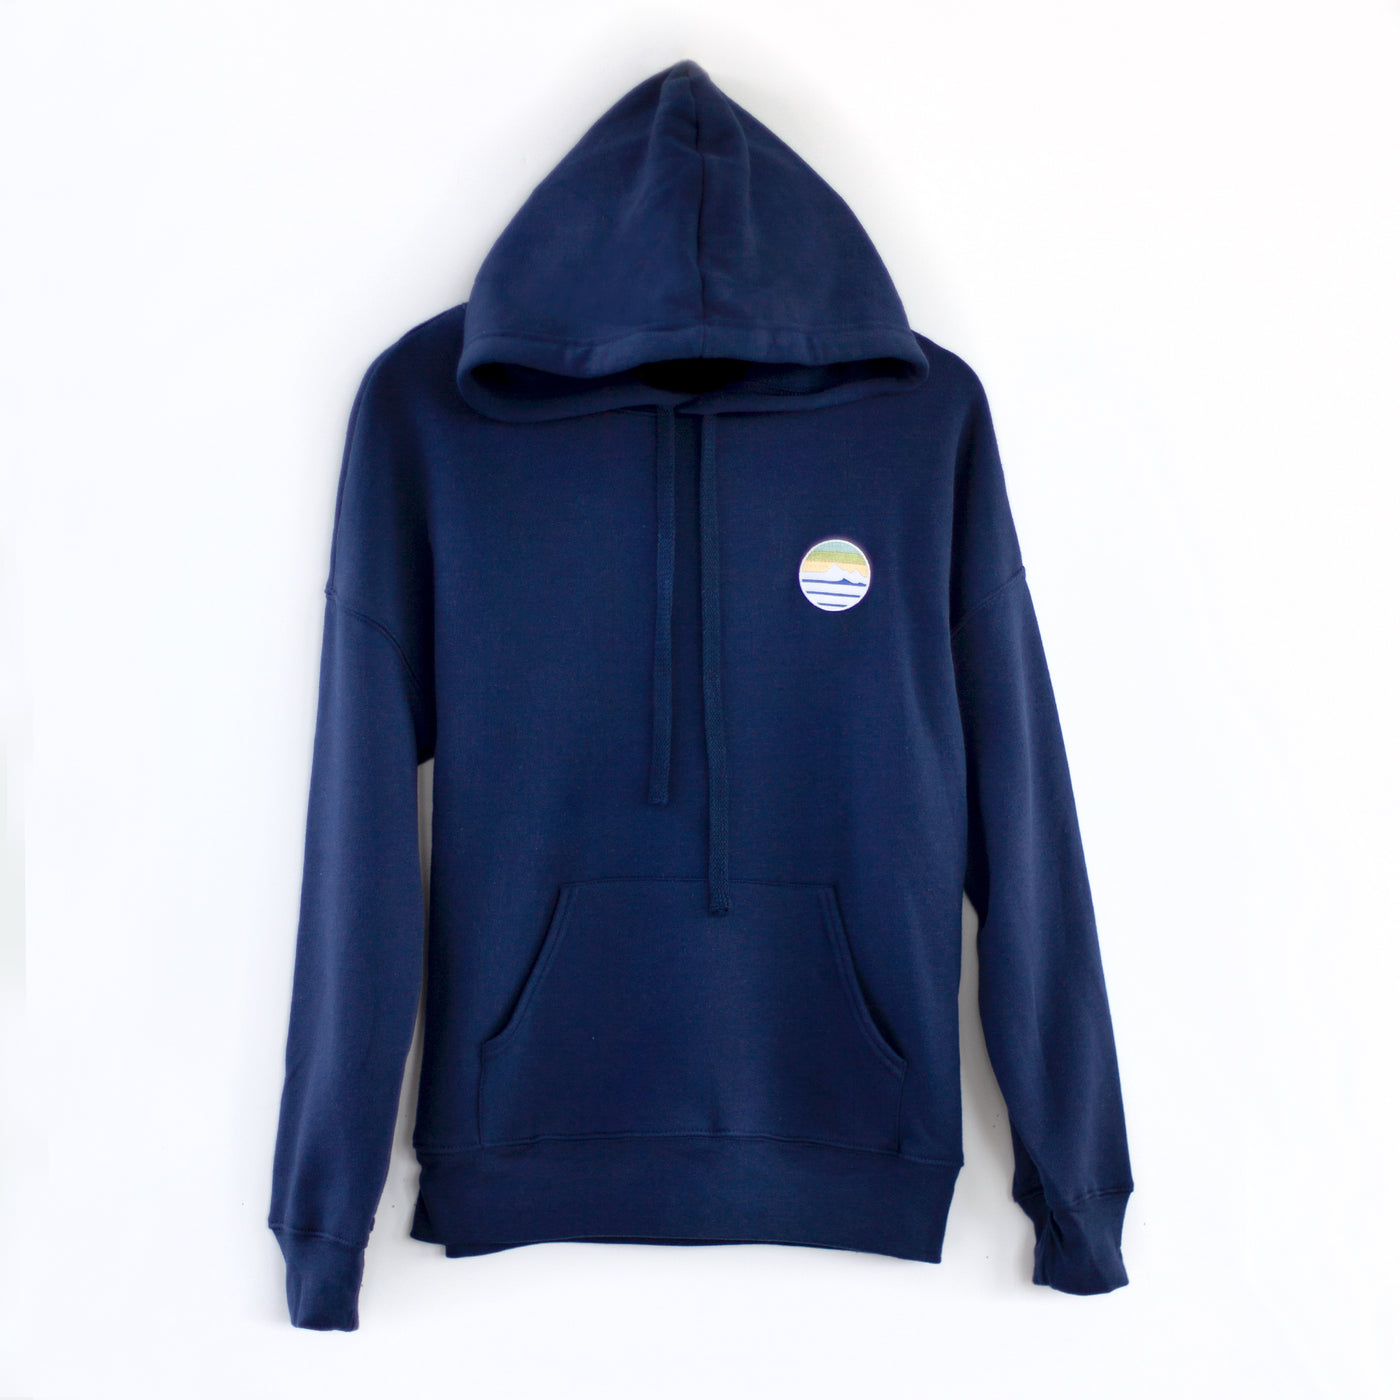 Traveler Patch Pullover Hoodie